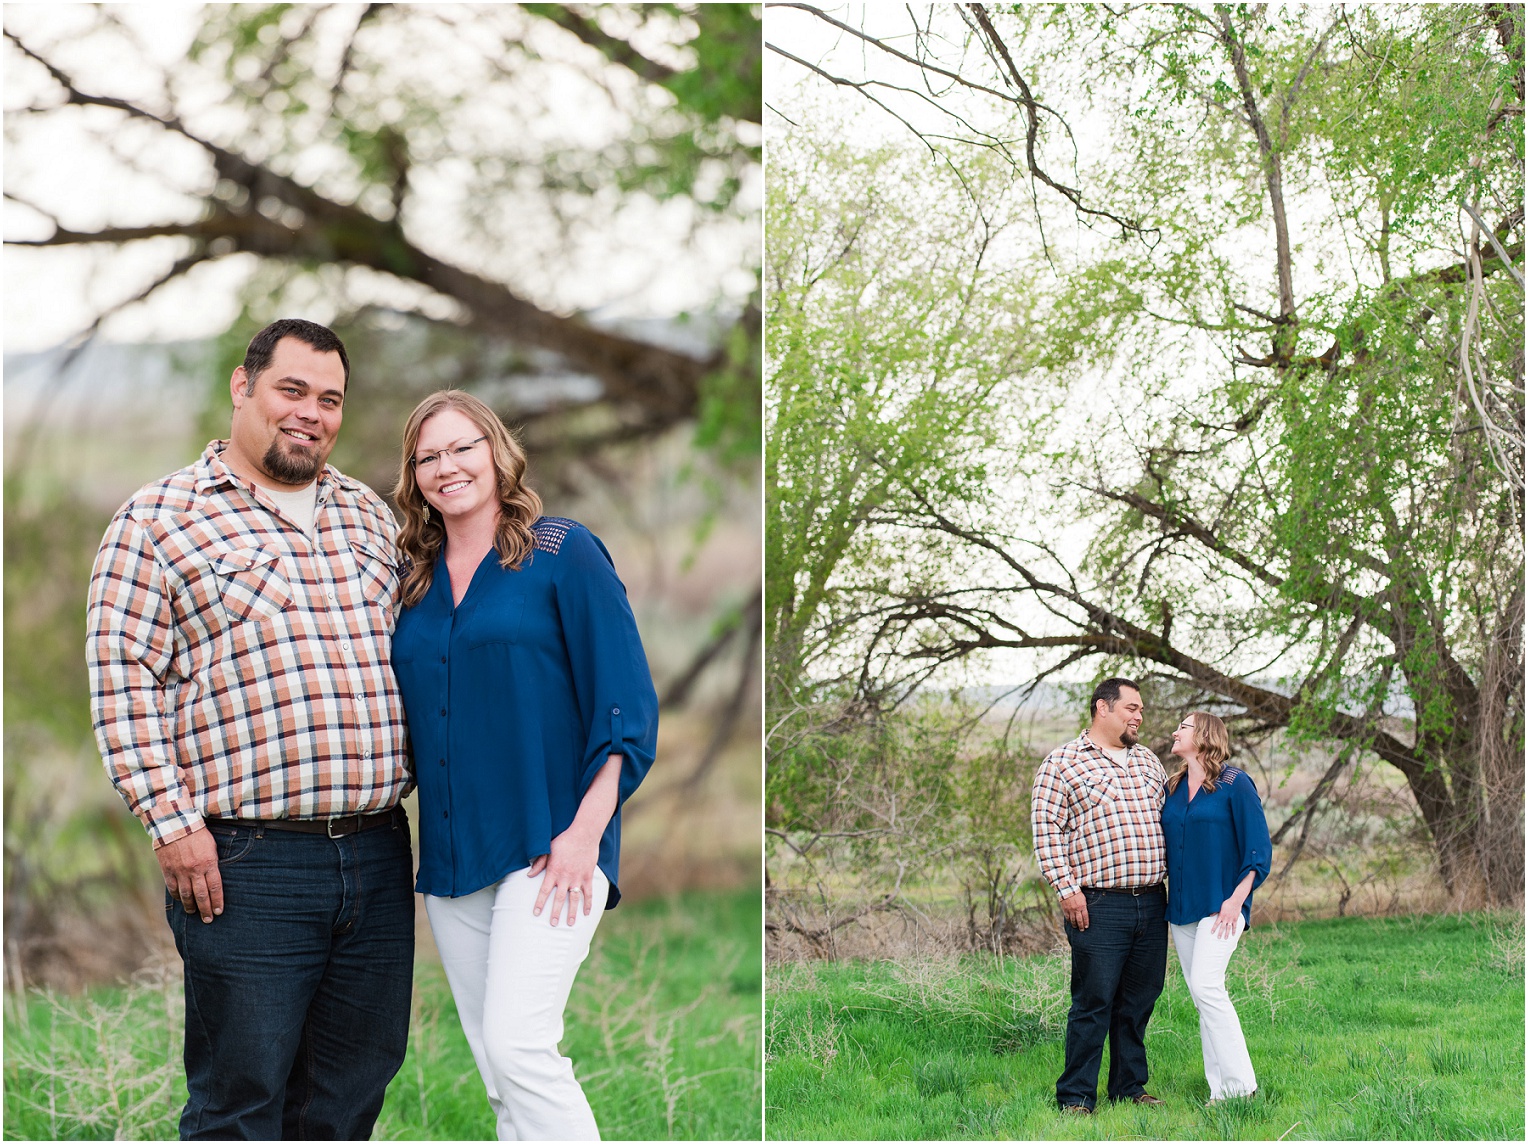 Vantage Crags Engagement Session Couple standing in front of trees